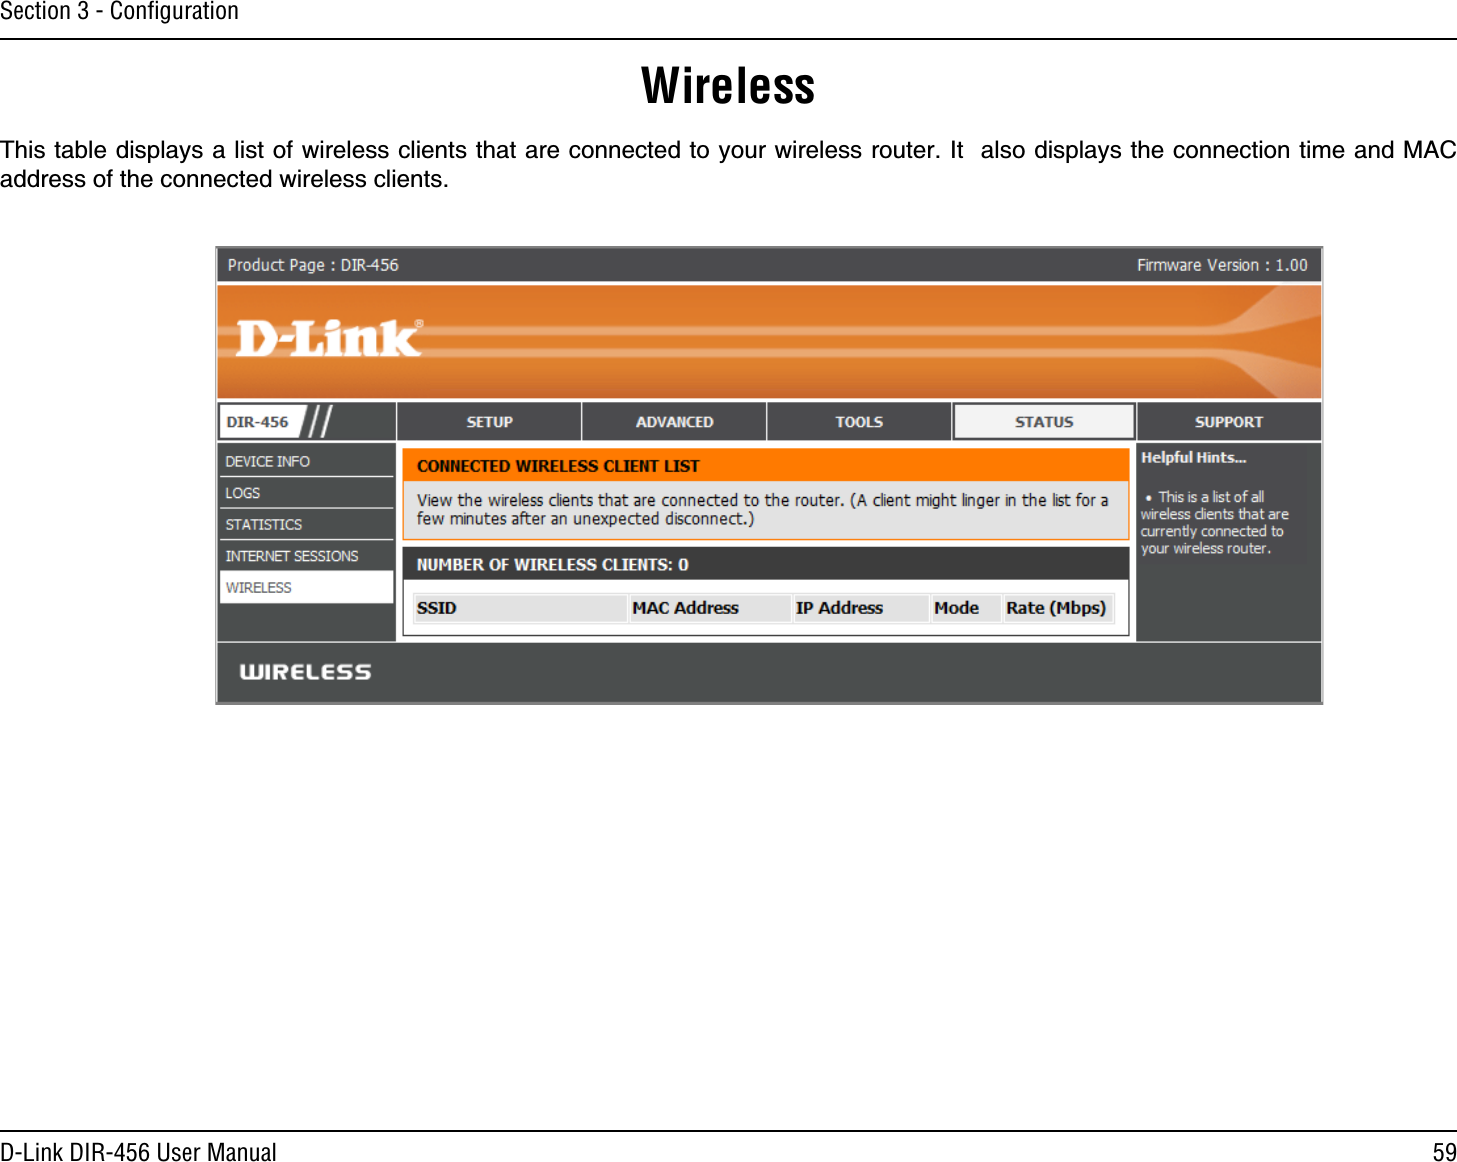 59D-Link DIR-456 User ManualSection 3 - ConﬁgurationWirelessThis table displays a list of wireless clients that are connected to your wireless router. It  also displays the connection time and MAC address of the connected wireless clients.